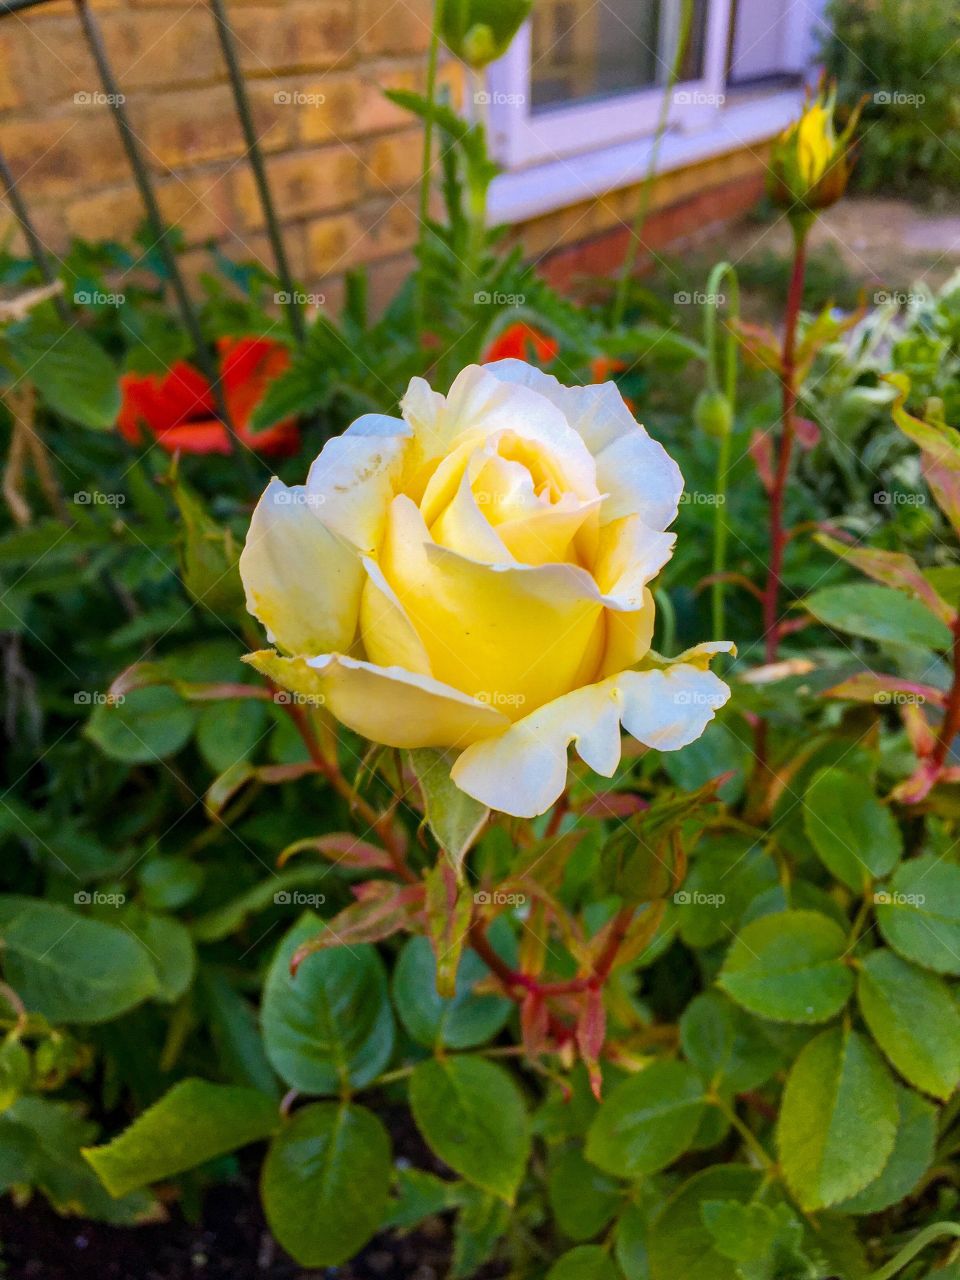 Teasing Georgia - this rose begins with pink and slowly turns into yellow, teasing indeed!